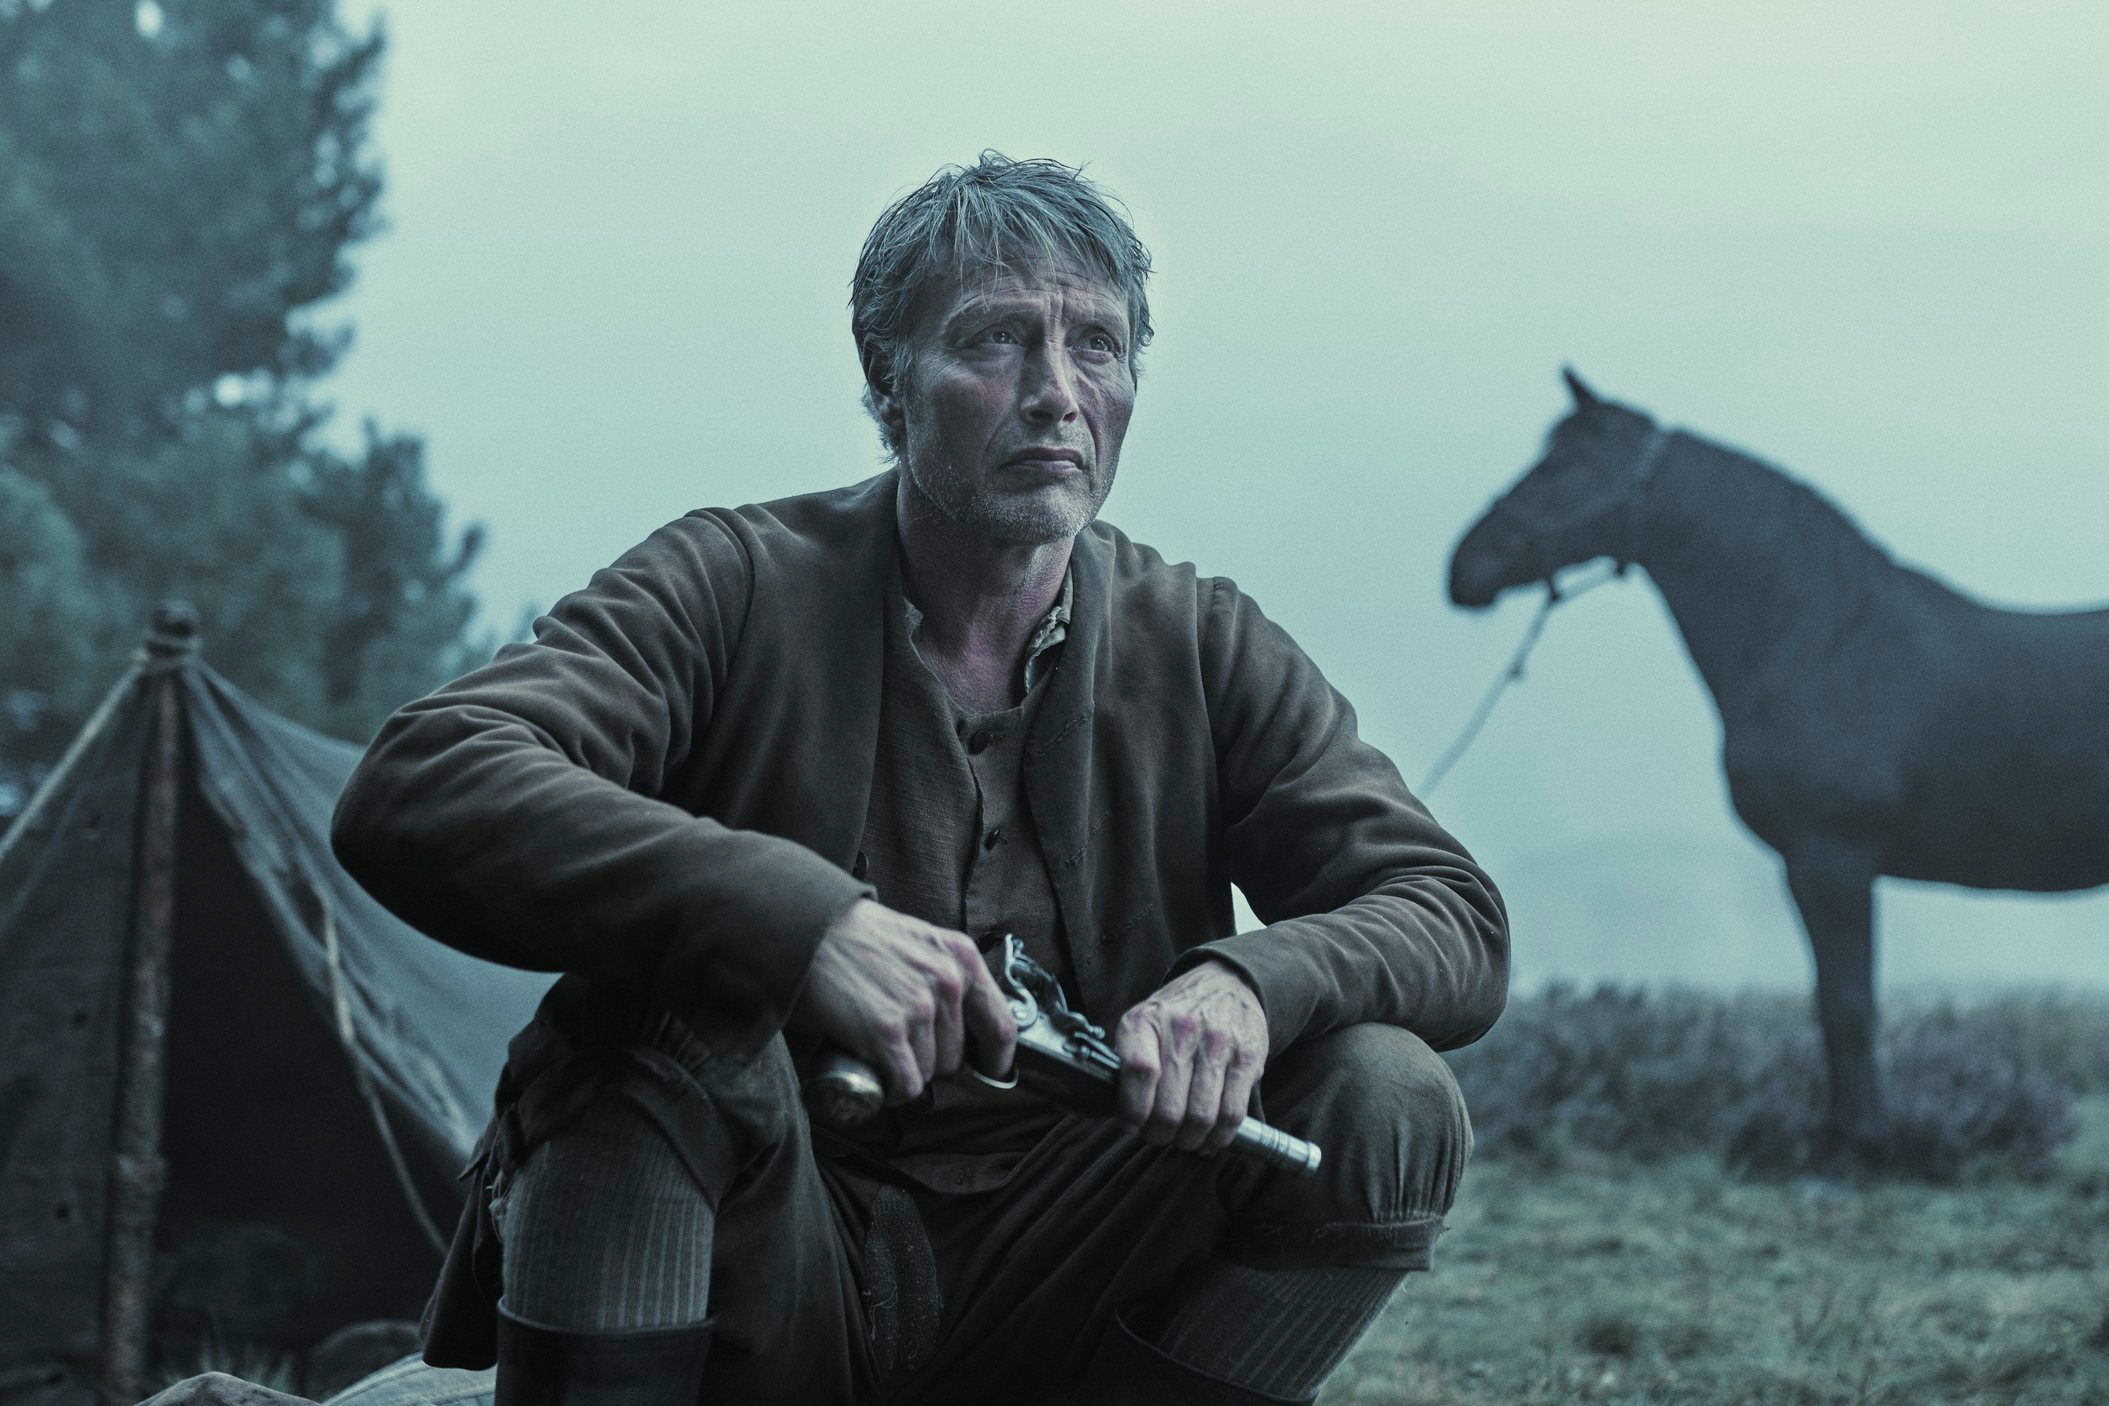 Mads Mikkelsen holds a pistol in The Promised Land.